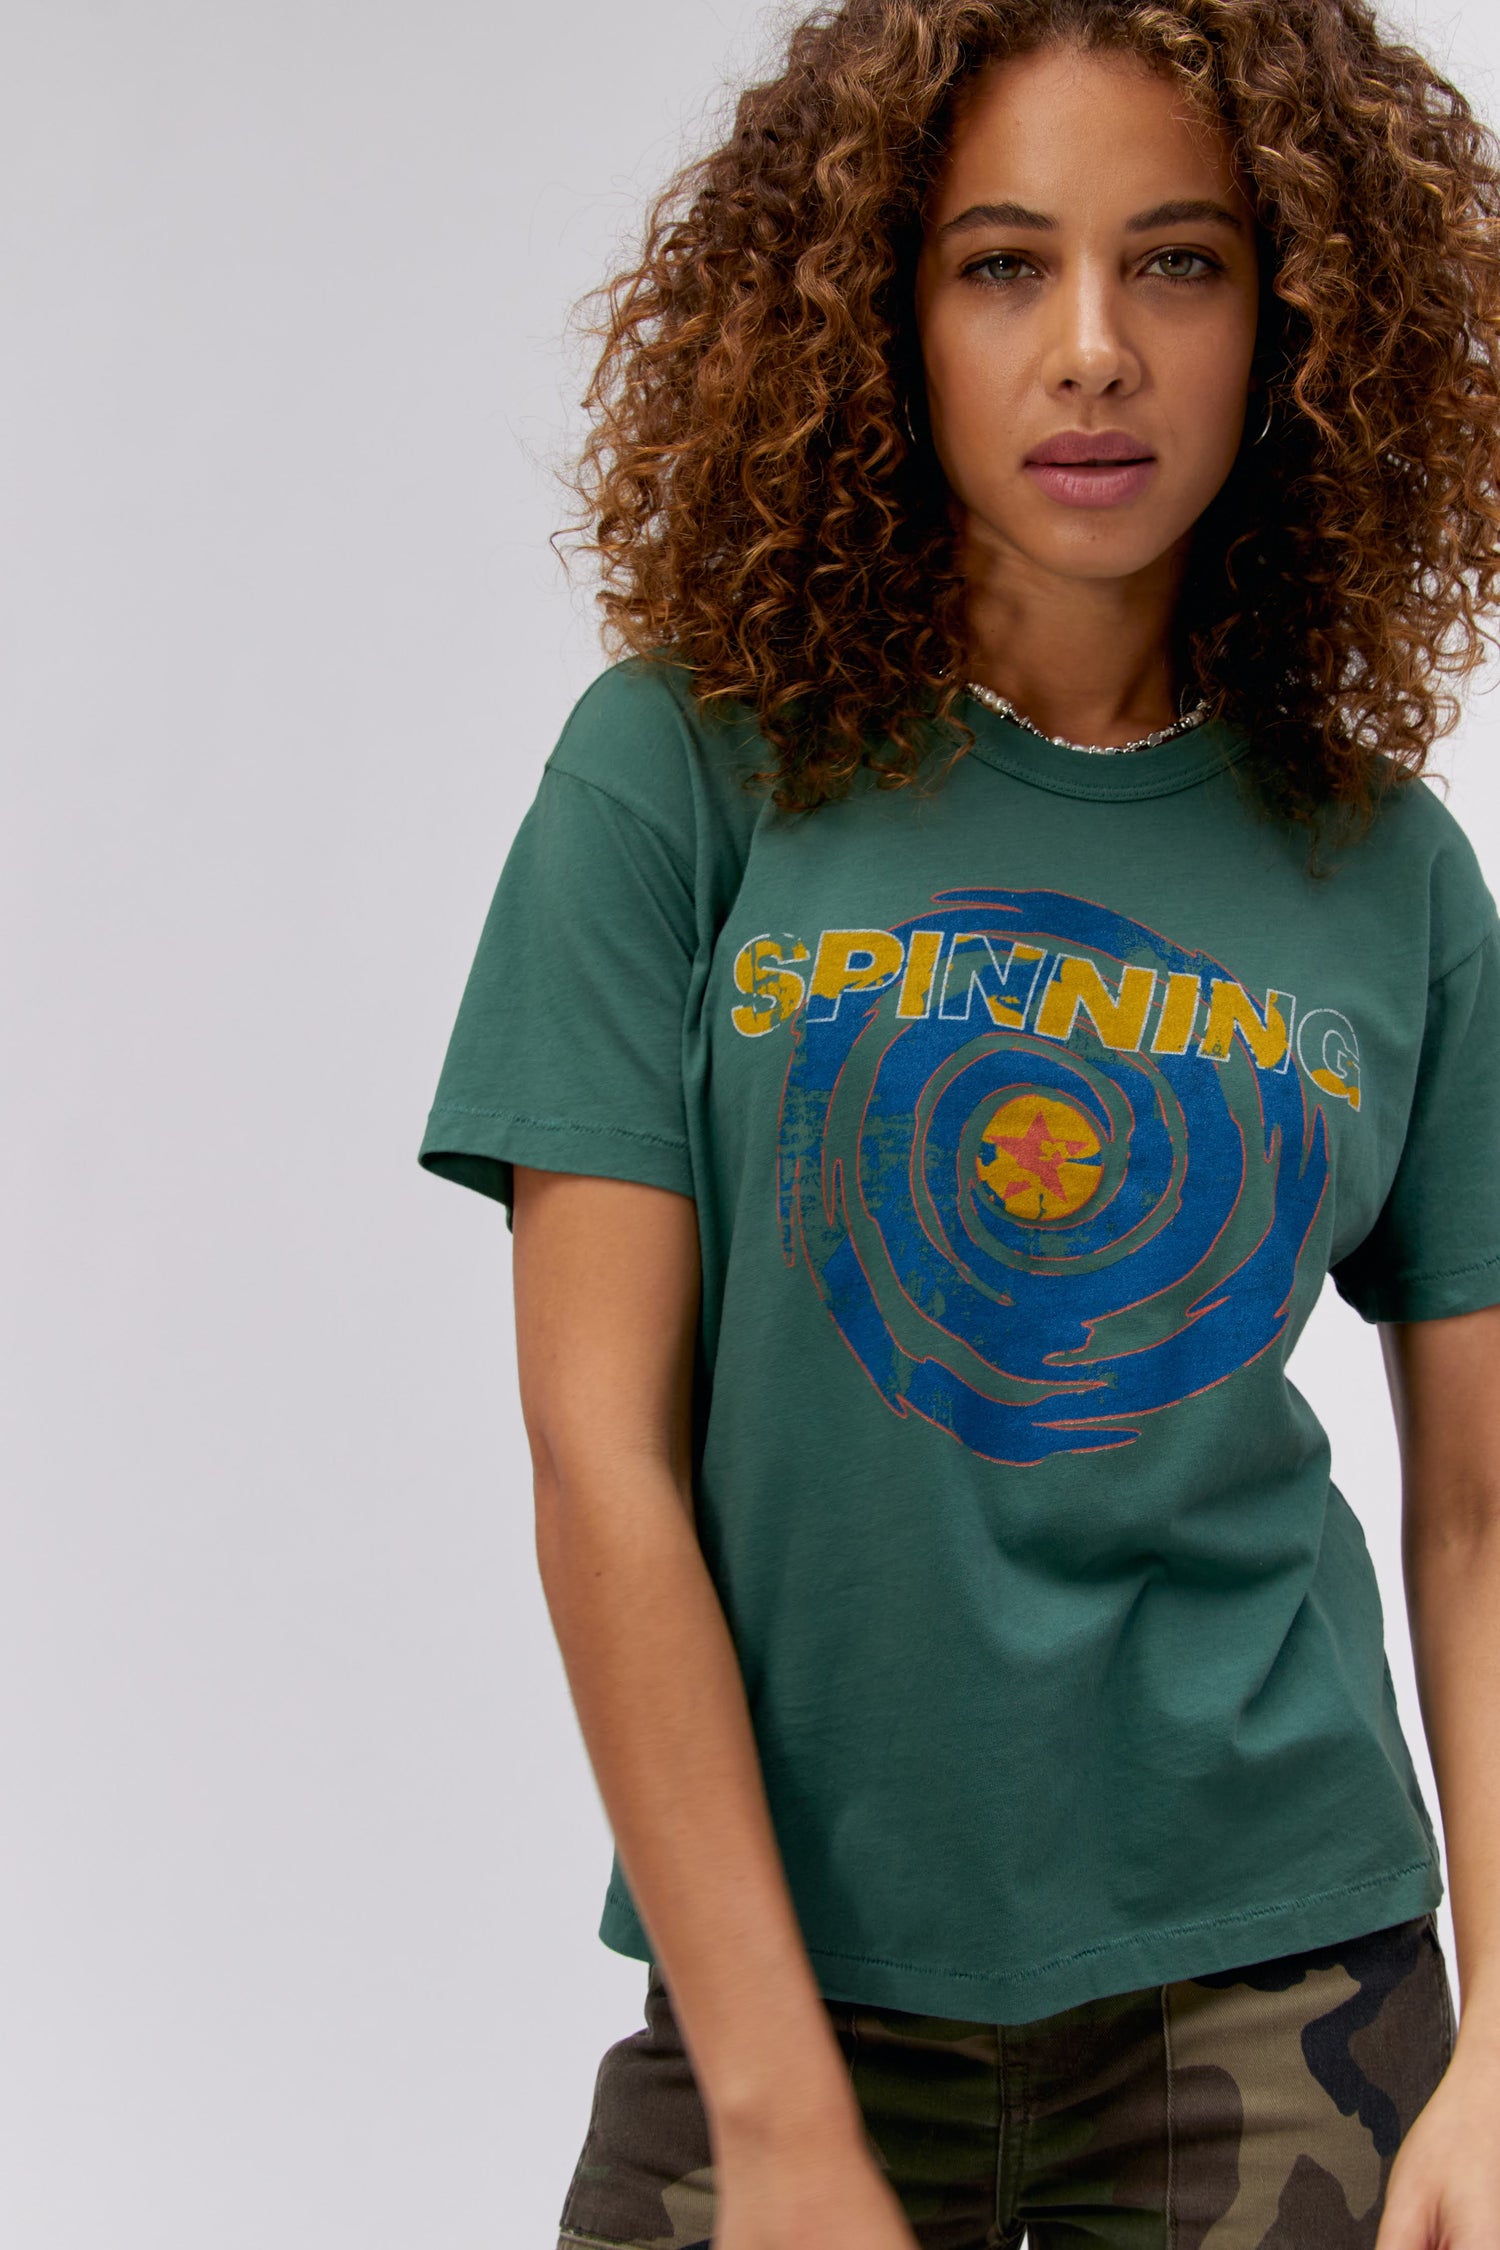 A curly-haired model featuring a green tee stamped with 'Spinning' and a spinning whirl with a star in the middle.